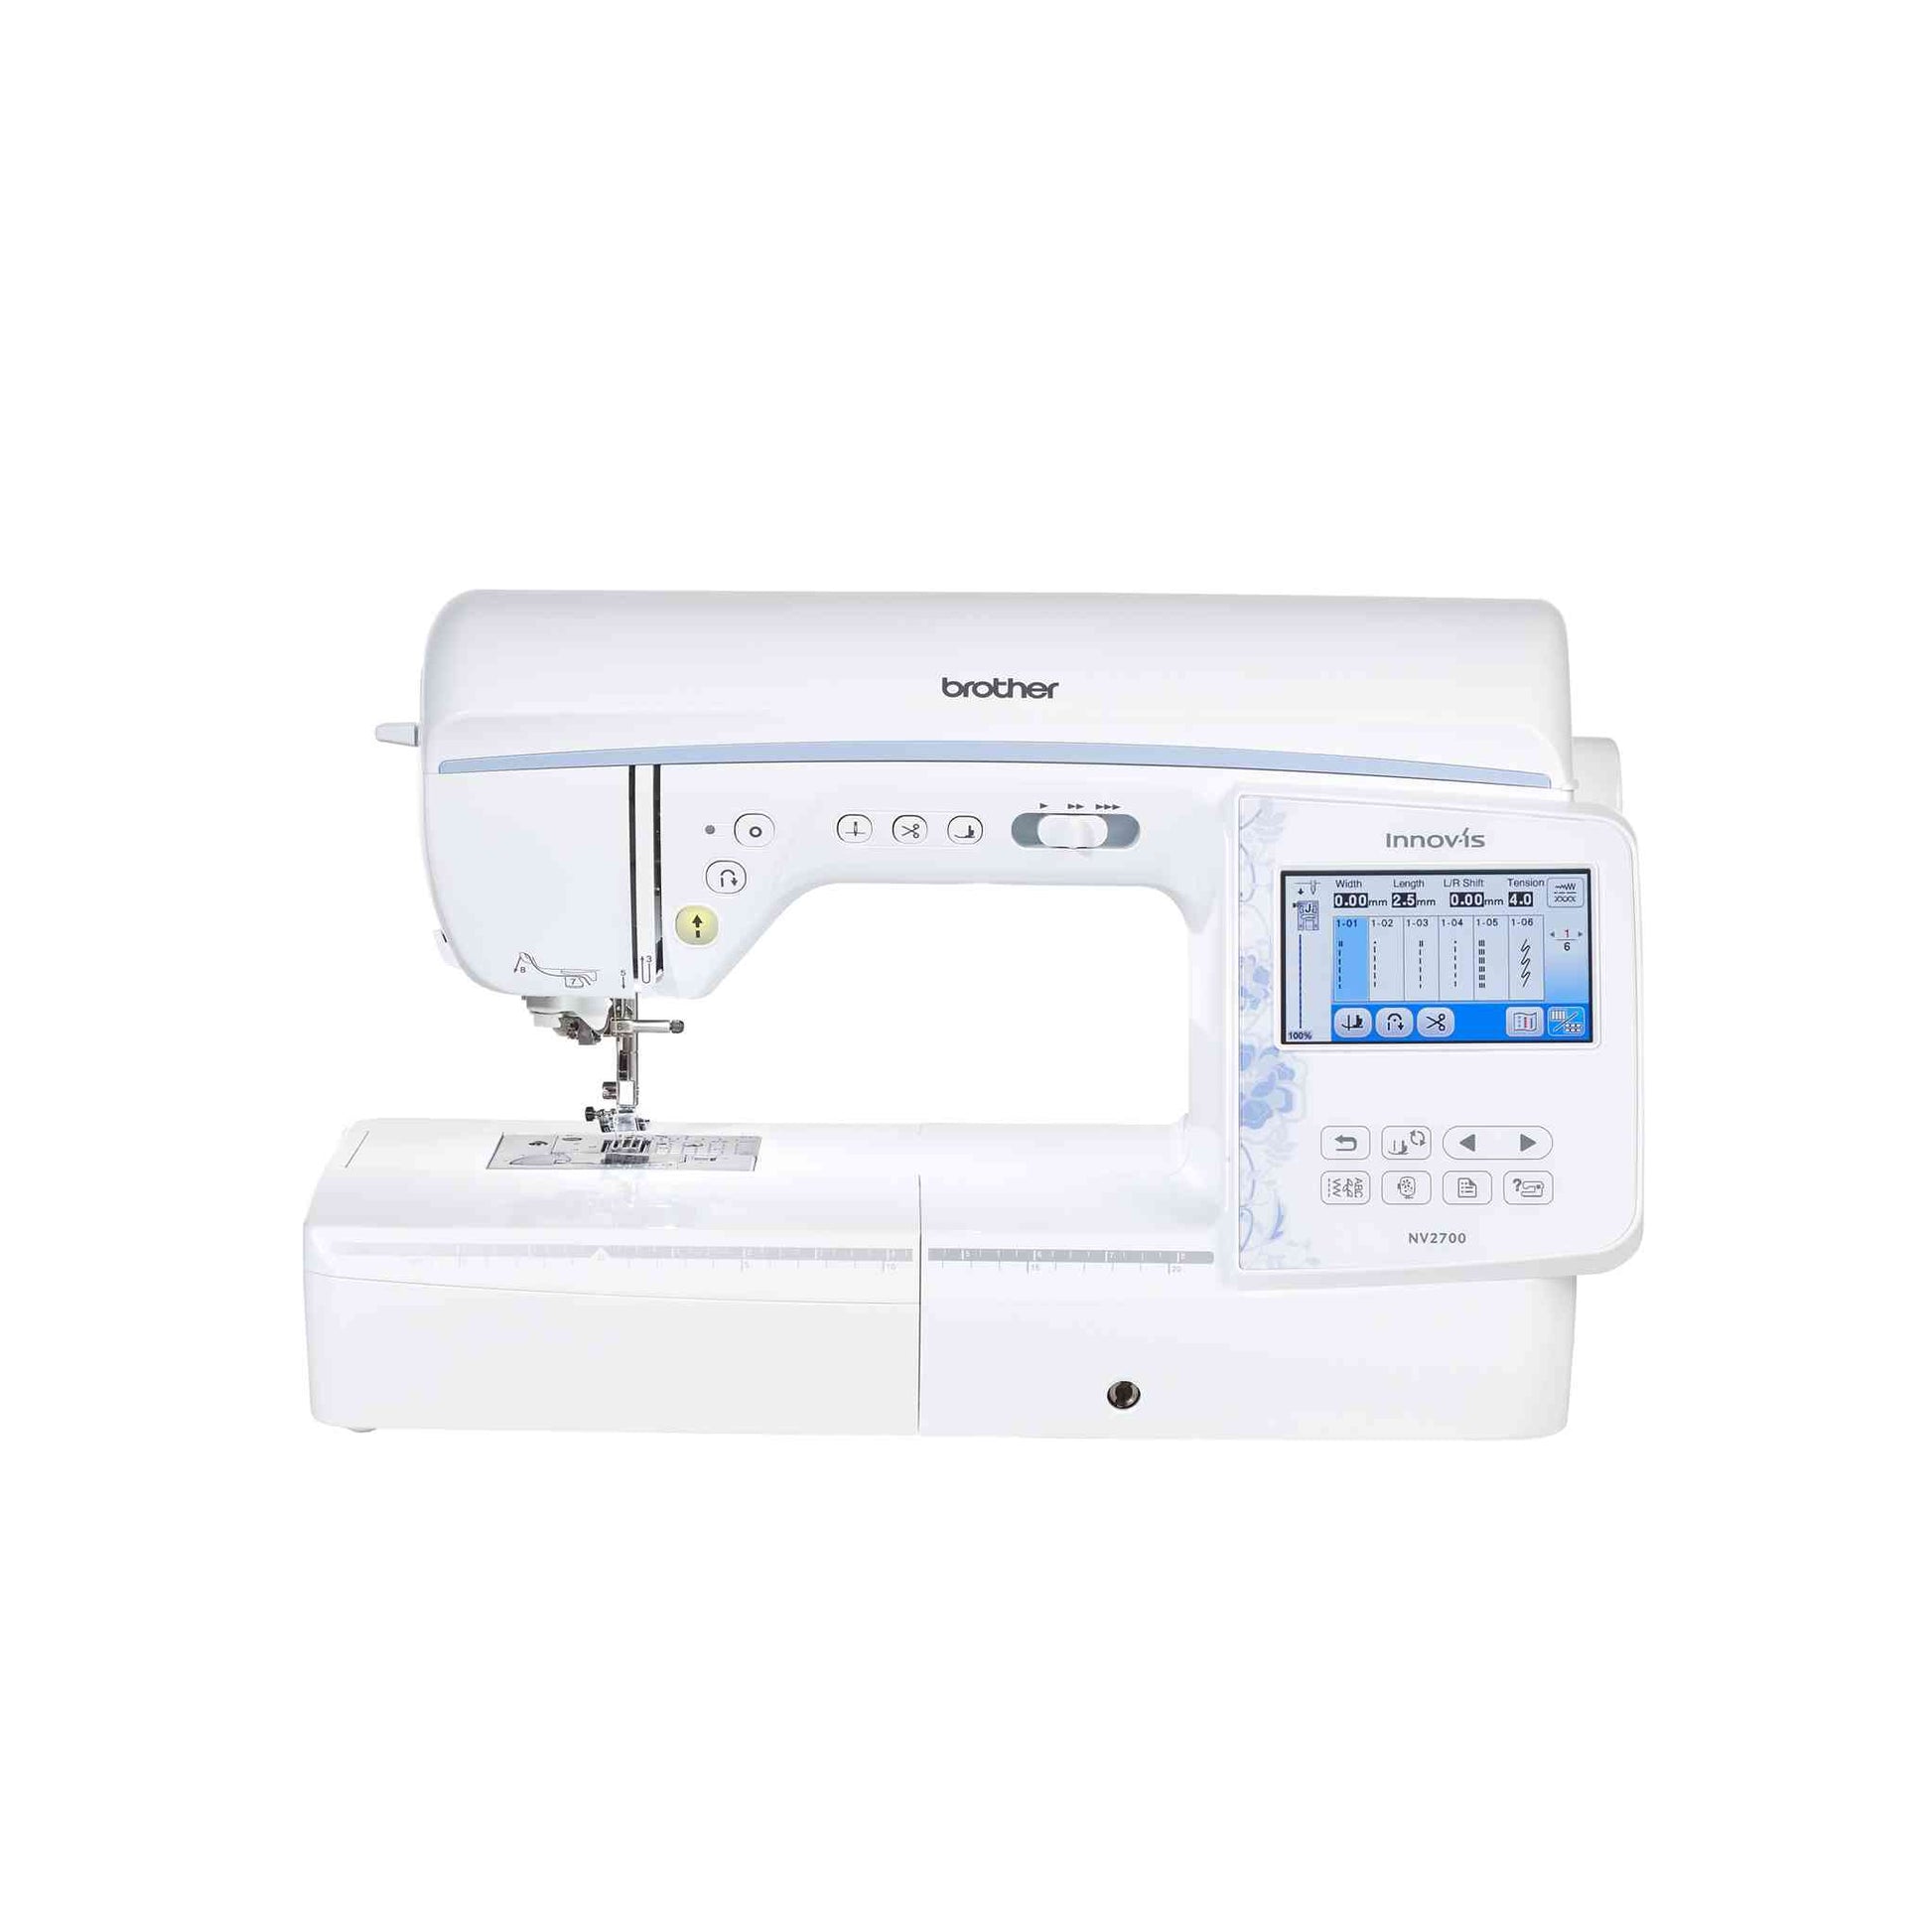 brother nv2700 sewing and embroidery machine front